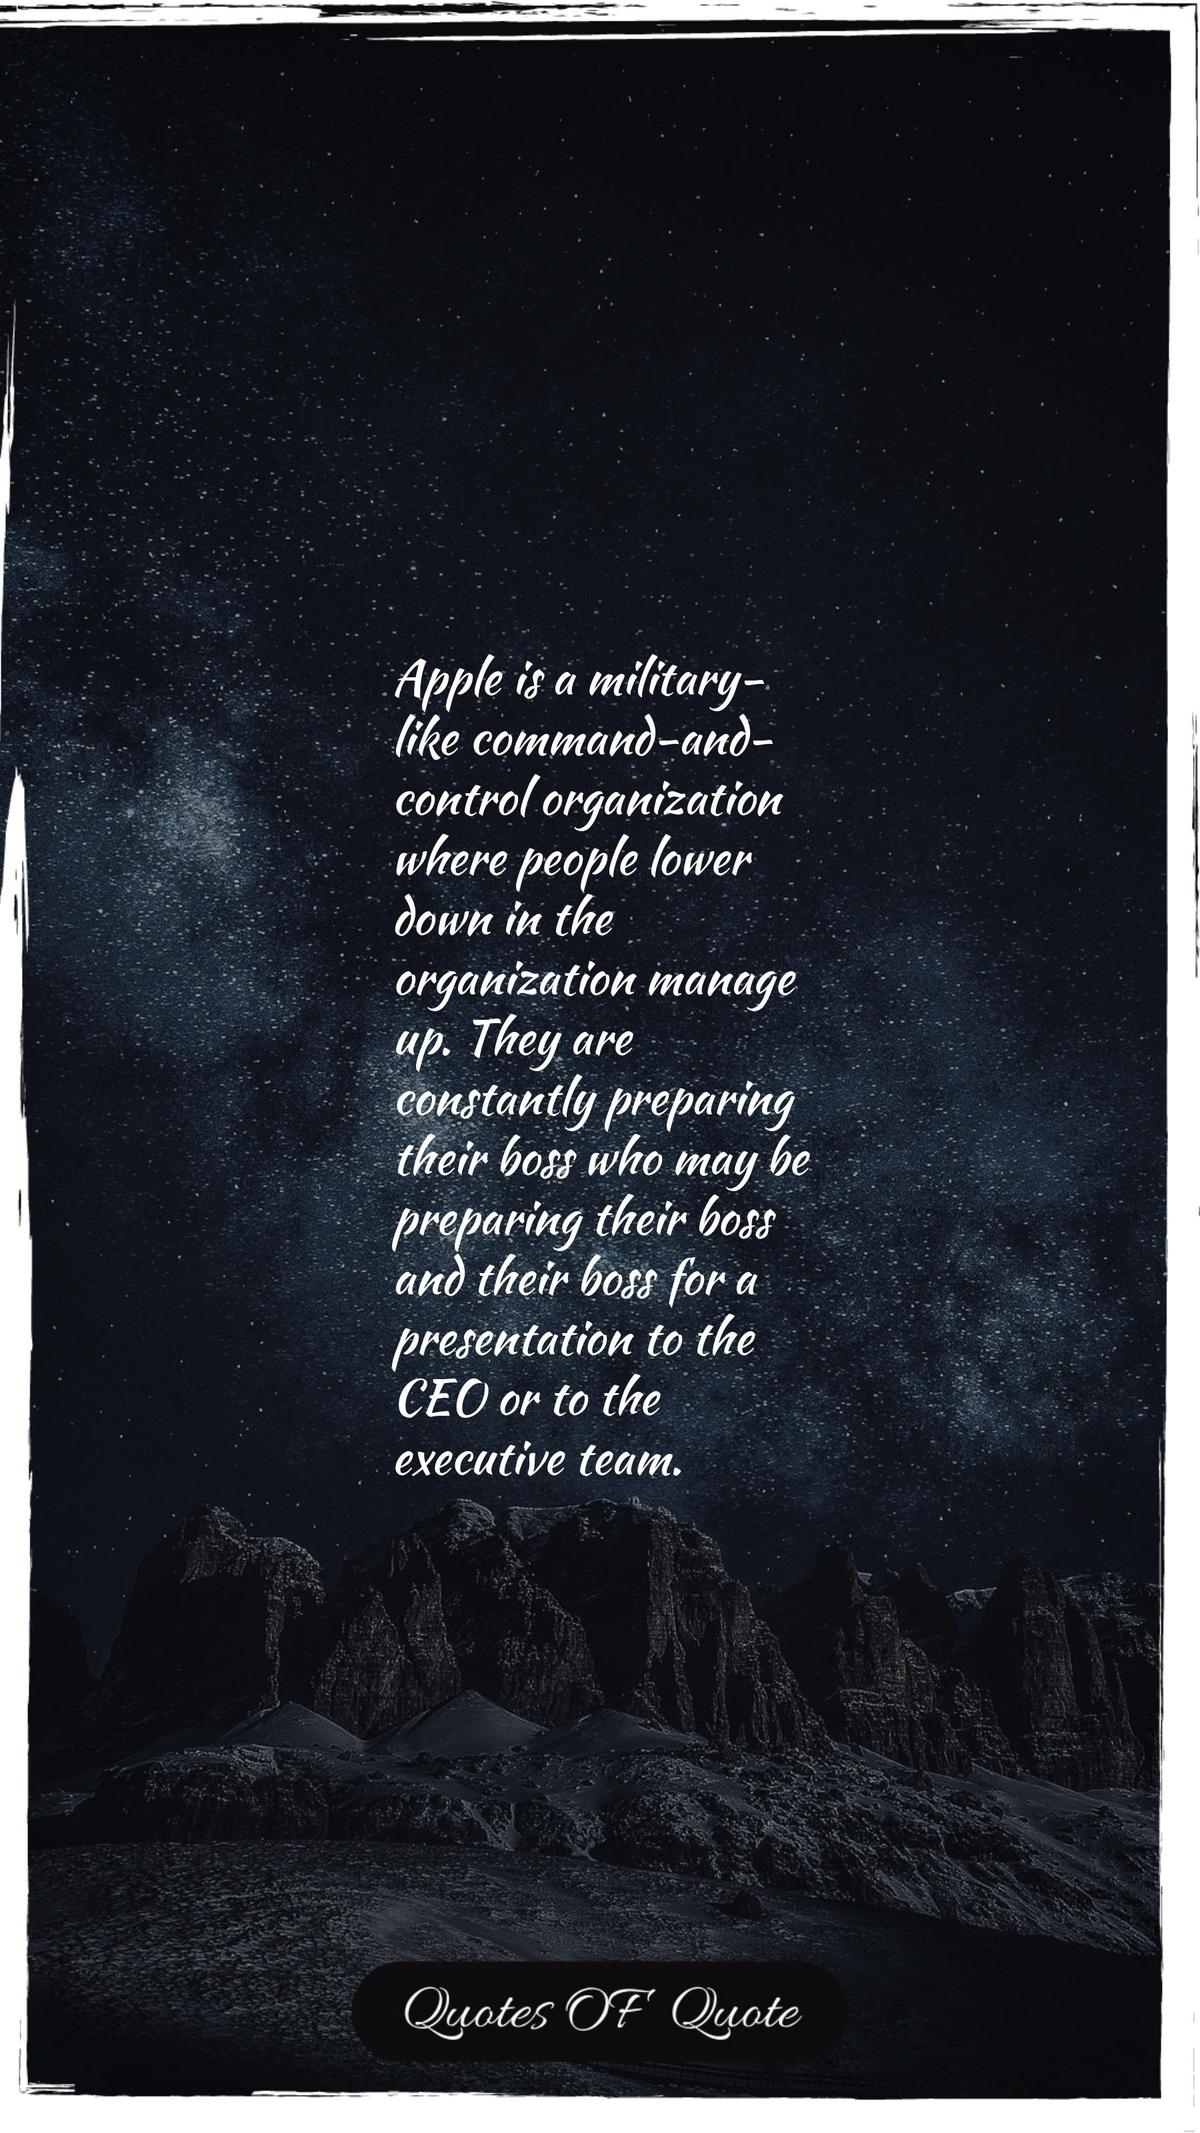 Apple is a military-like command-and-control organization where people lower down in the organization manage up. They are constantly preparing their boss who may be preparing their boss and their boss for a presentation to the CEO or to the executive team.